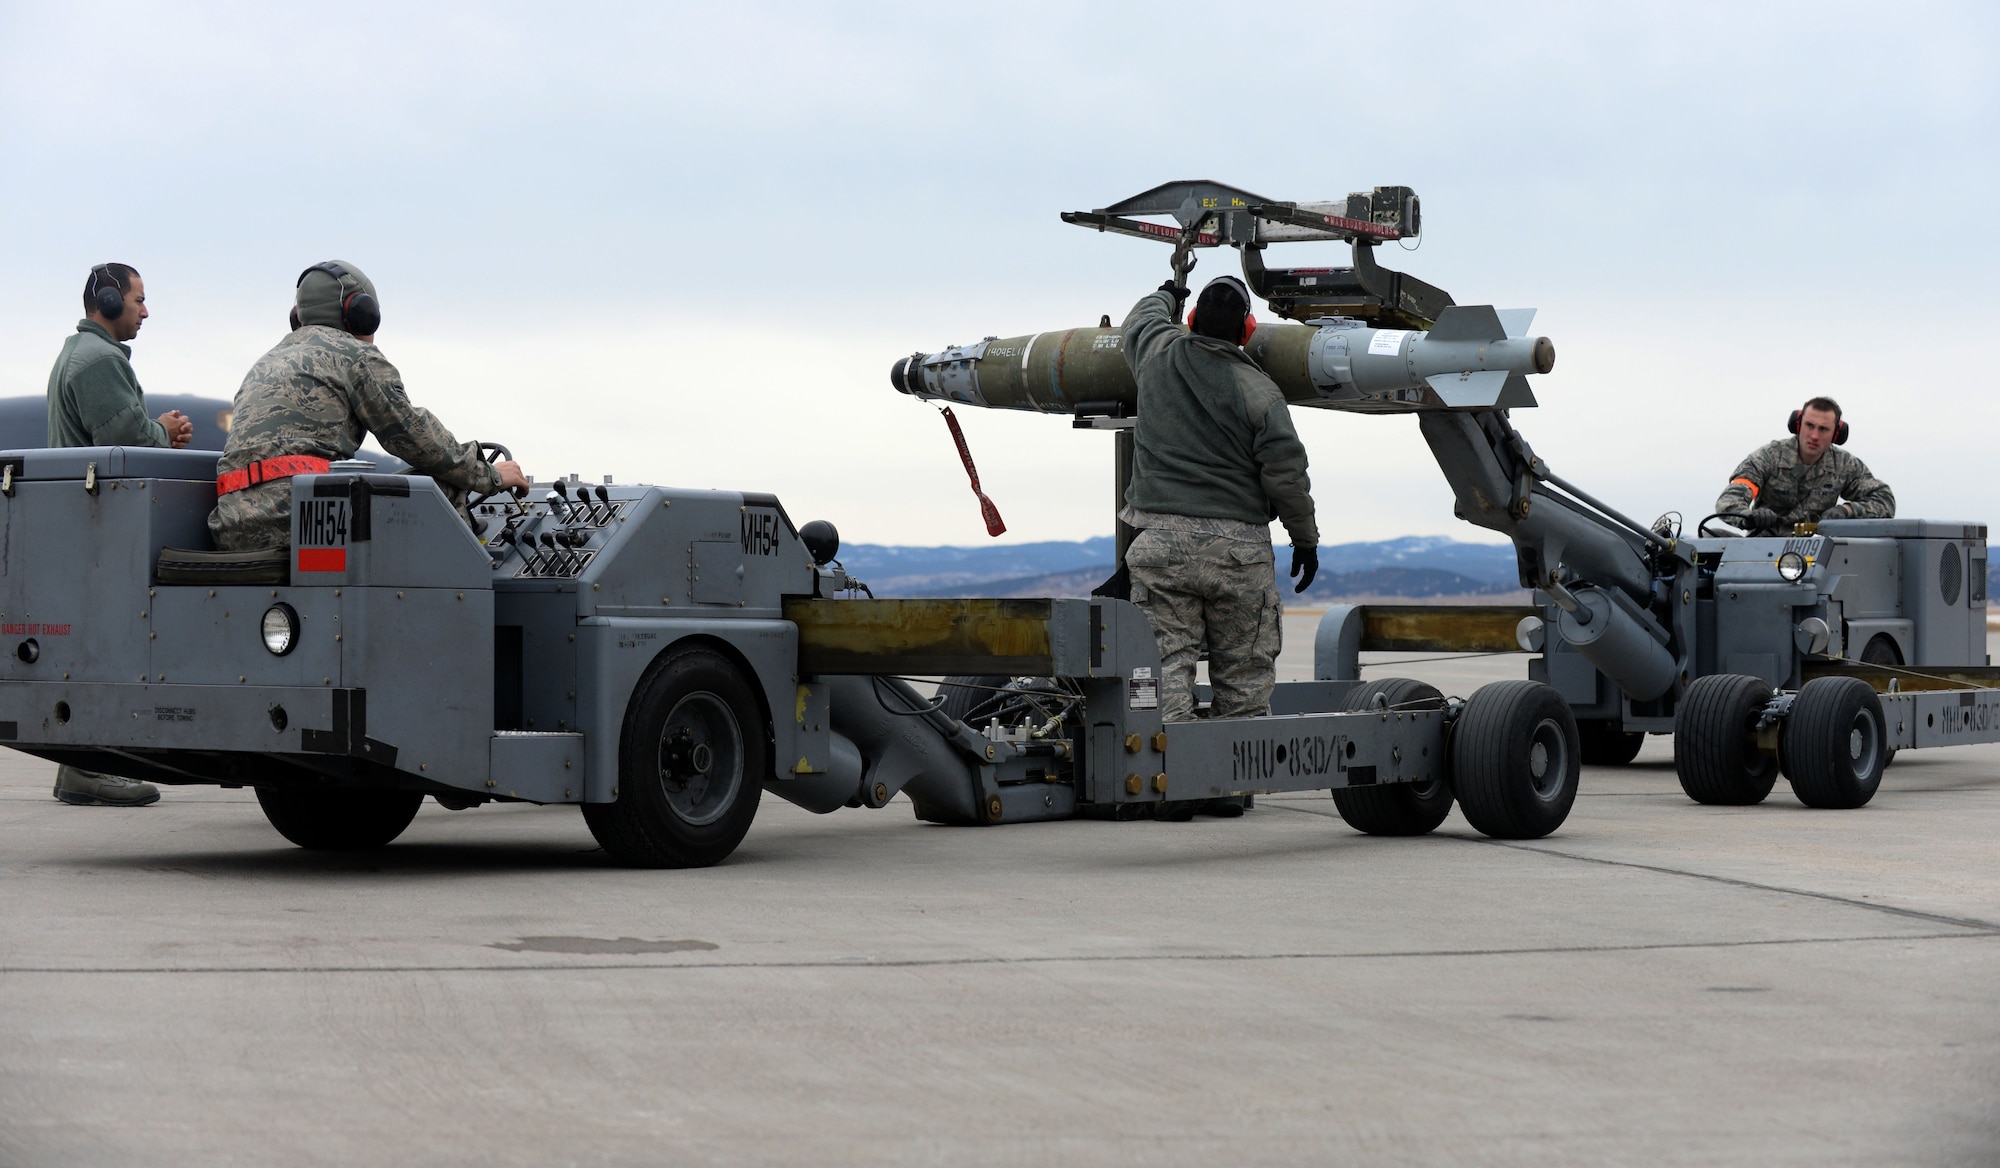 Load crew members from the 28th Aircraft Maintenance Squadron transfer a GBU-54 from a transfer jammer onto a ram jammer during the Combat Hammer exercise at Ellsworth Air Force Base, S.D., Feb. 14, 2014. The process of weapons handling was evaluated from start to finish during the exercise that assesses the effectiveness, maintainability, suitability and accuracy of employing precision guided munitions.  (U.S. Air Force photo by Airman 1st Class Rebecca Imwalle/ Released)